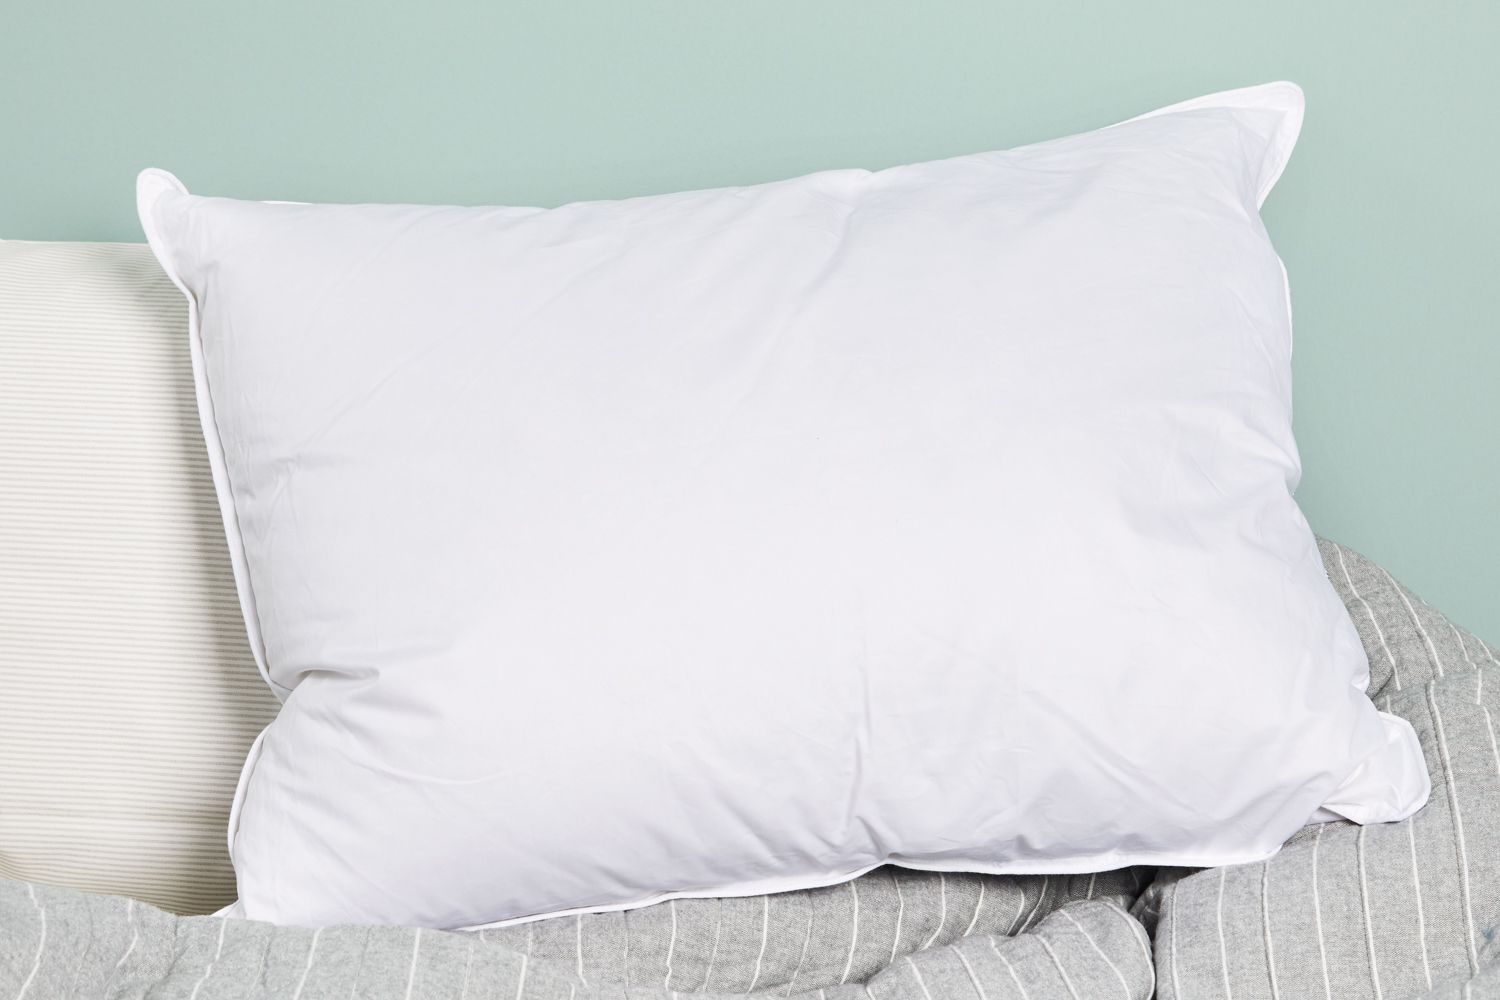 What Are The Best Down Pillows